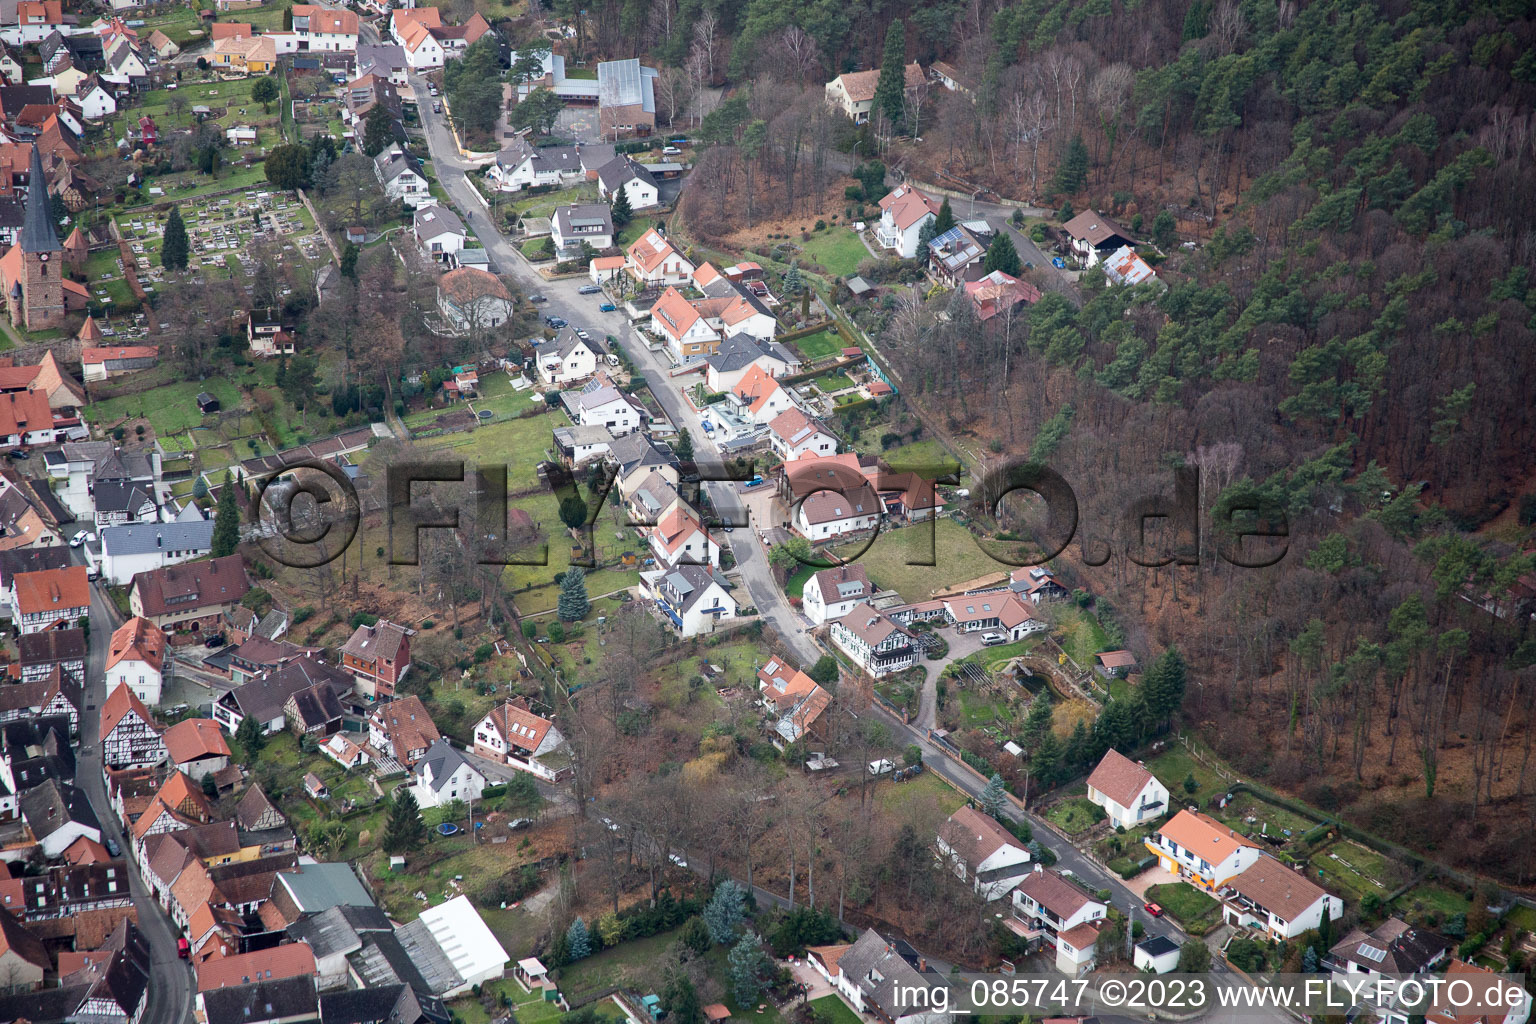 Dörrenbach in the state Rhineland-Palatinate, Germany viewn from the air